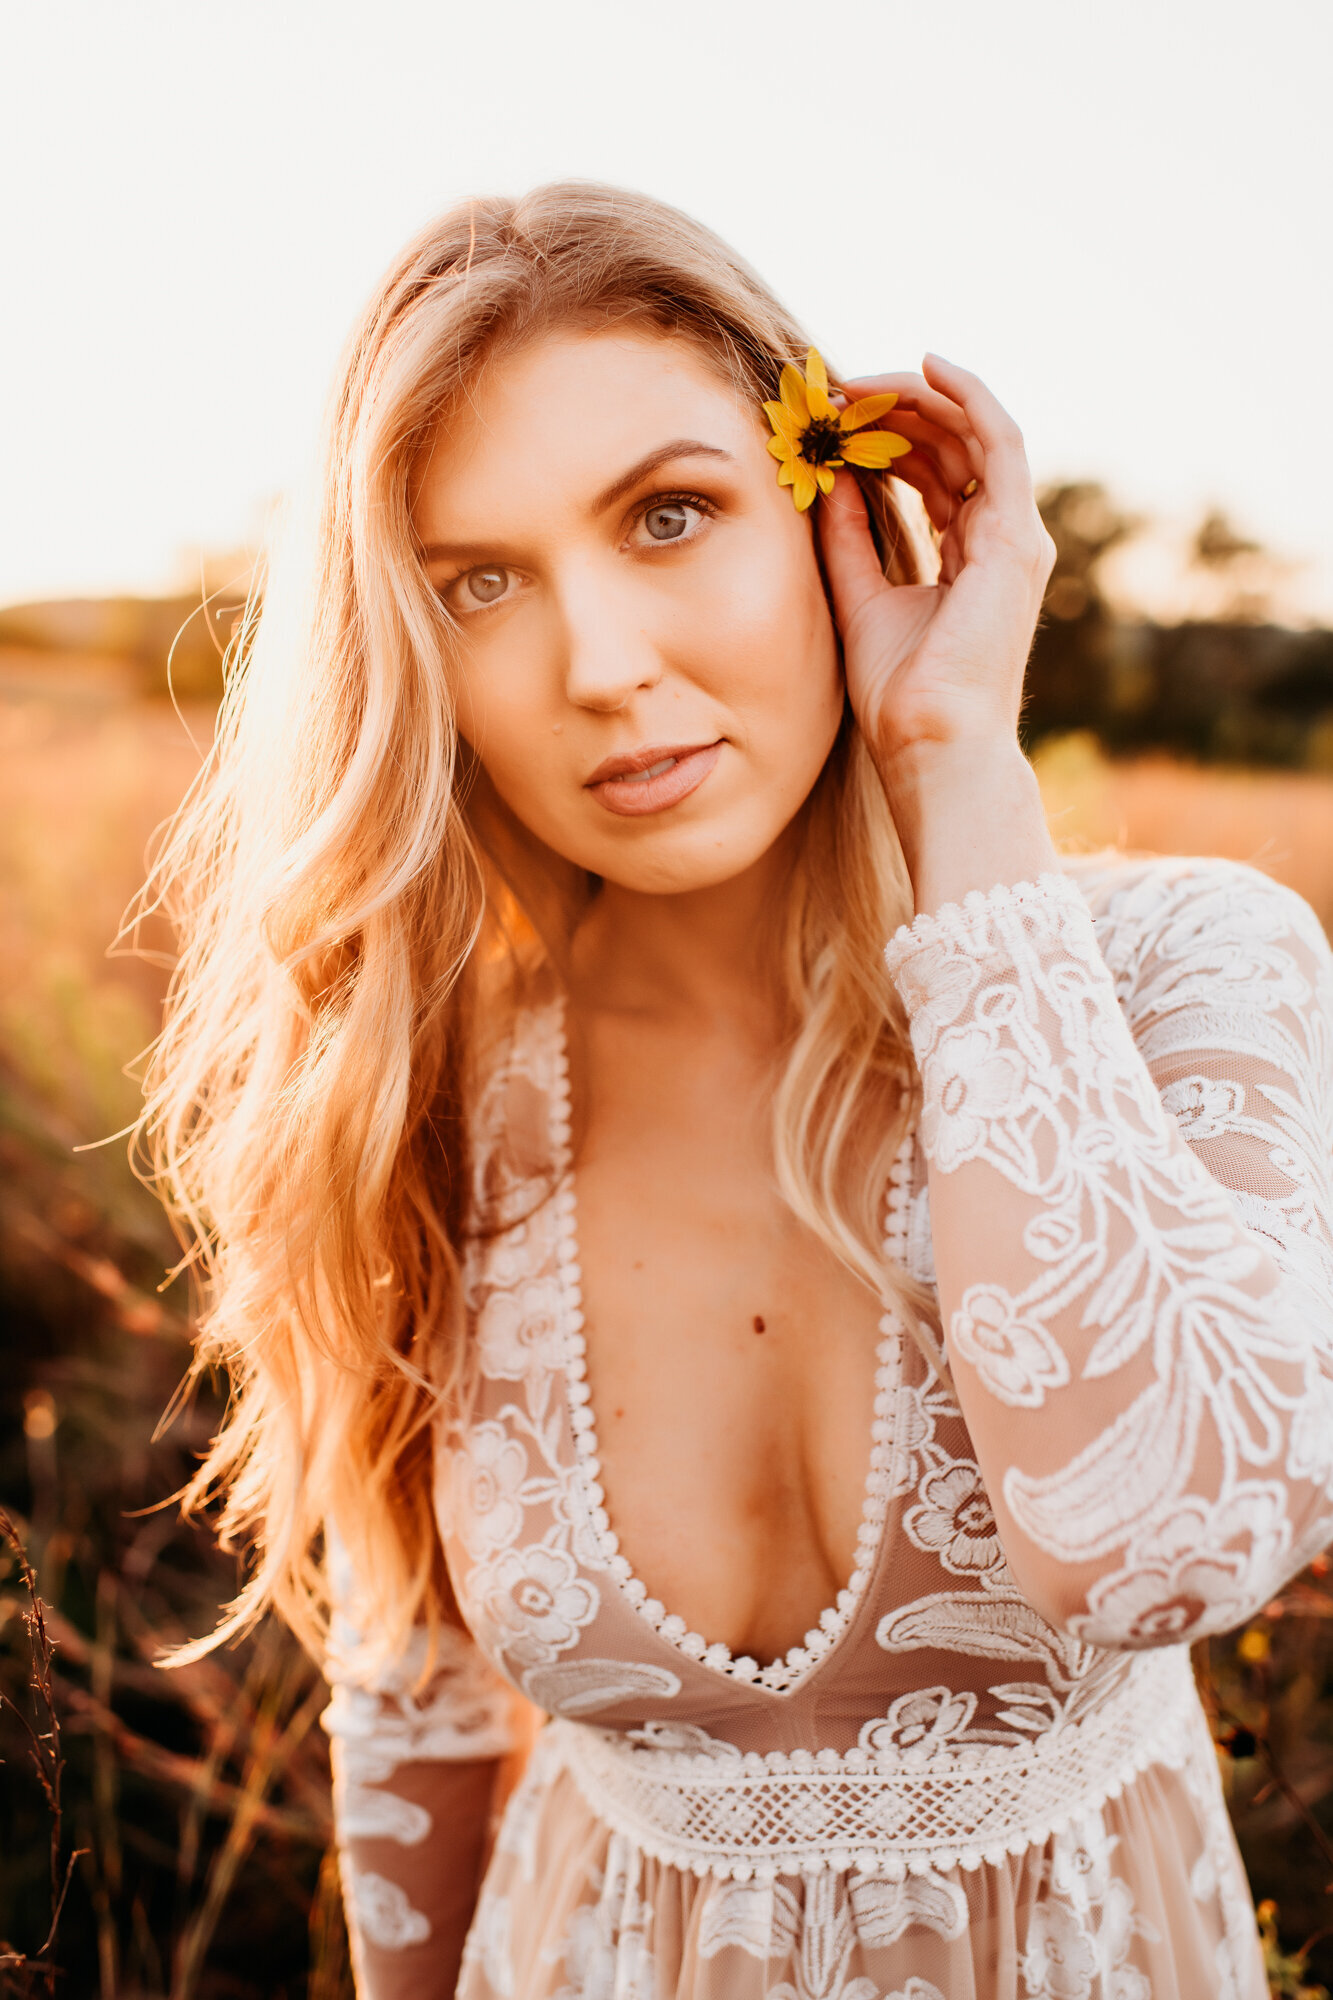 Branding Photographer, a woman in a lacy dress places a daisy in her hair at golden hour outside